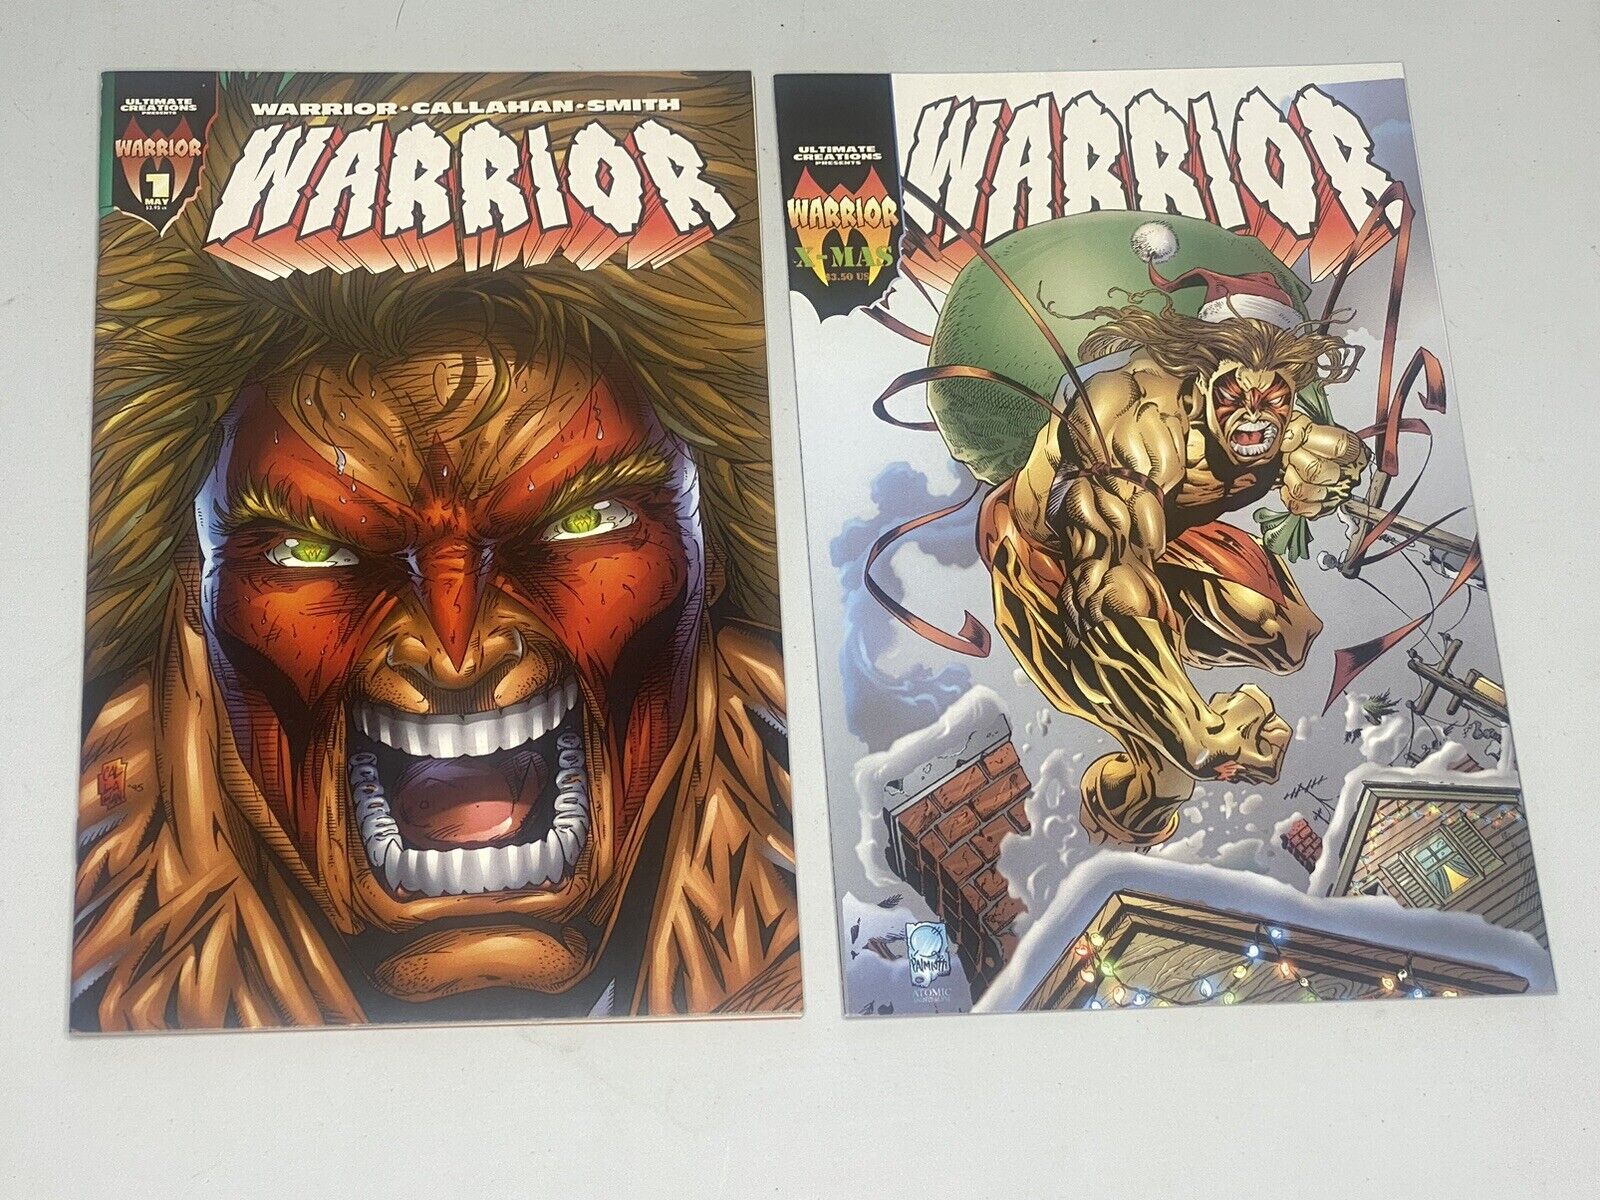 Ultimate Creations Presents Warrior # 1 & #4(X-MAS Variant) WWF 1st appearance